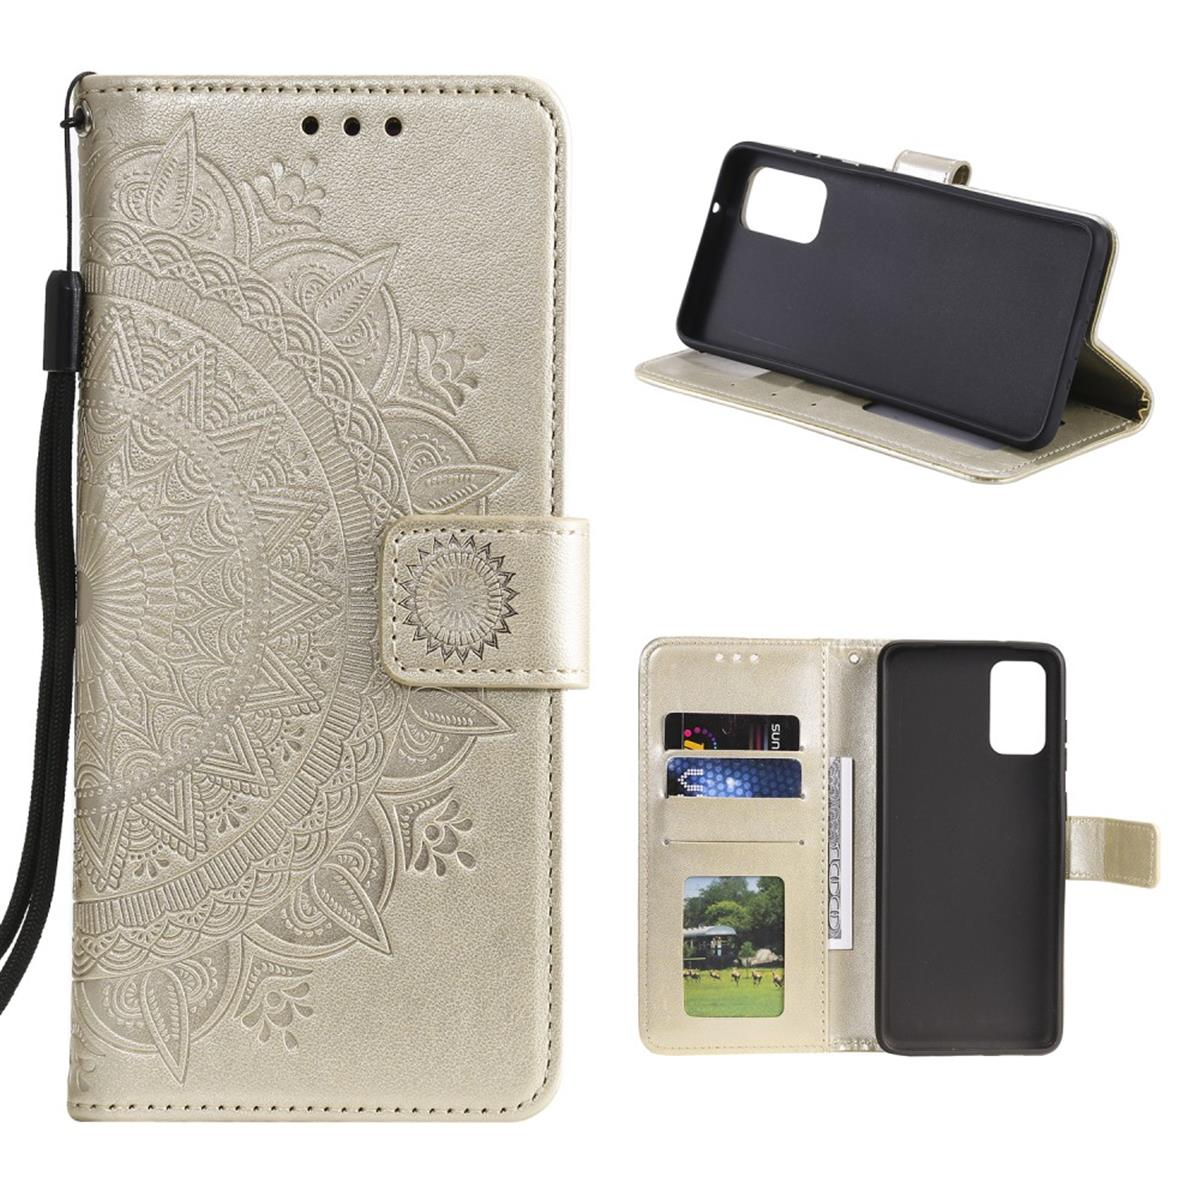 Samsung, Klapphülle Muster, mit Bookcover, Mandala Galaxy COVERKINGZ Gold M31s,